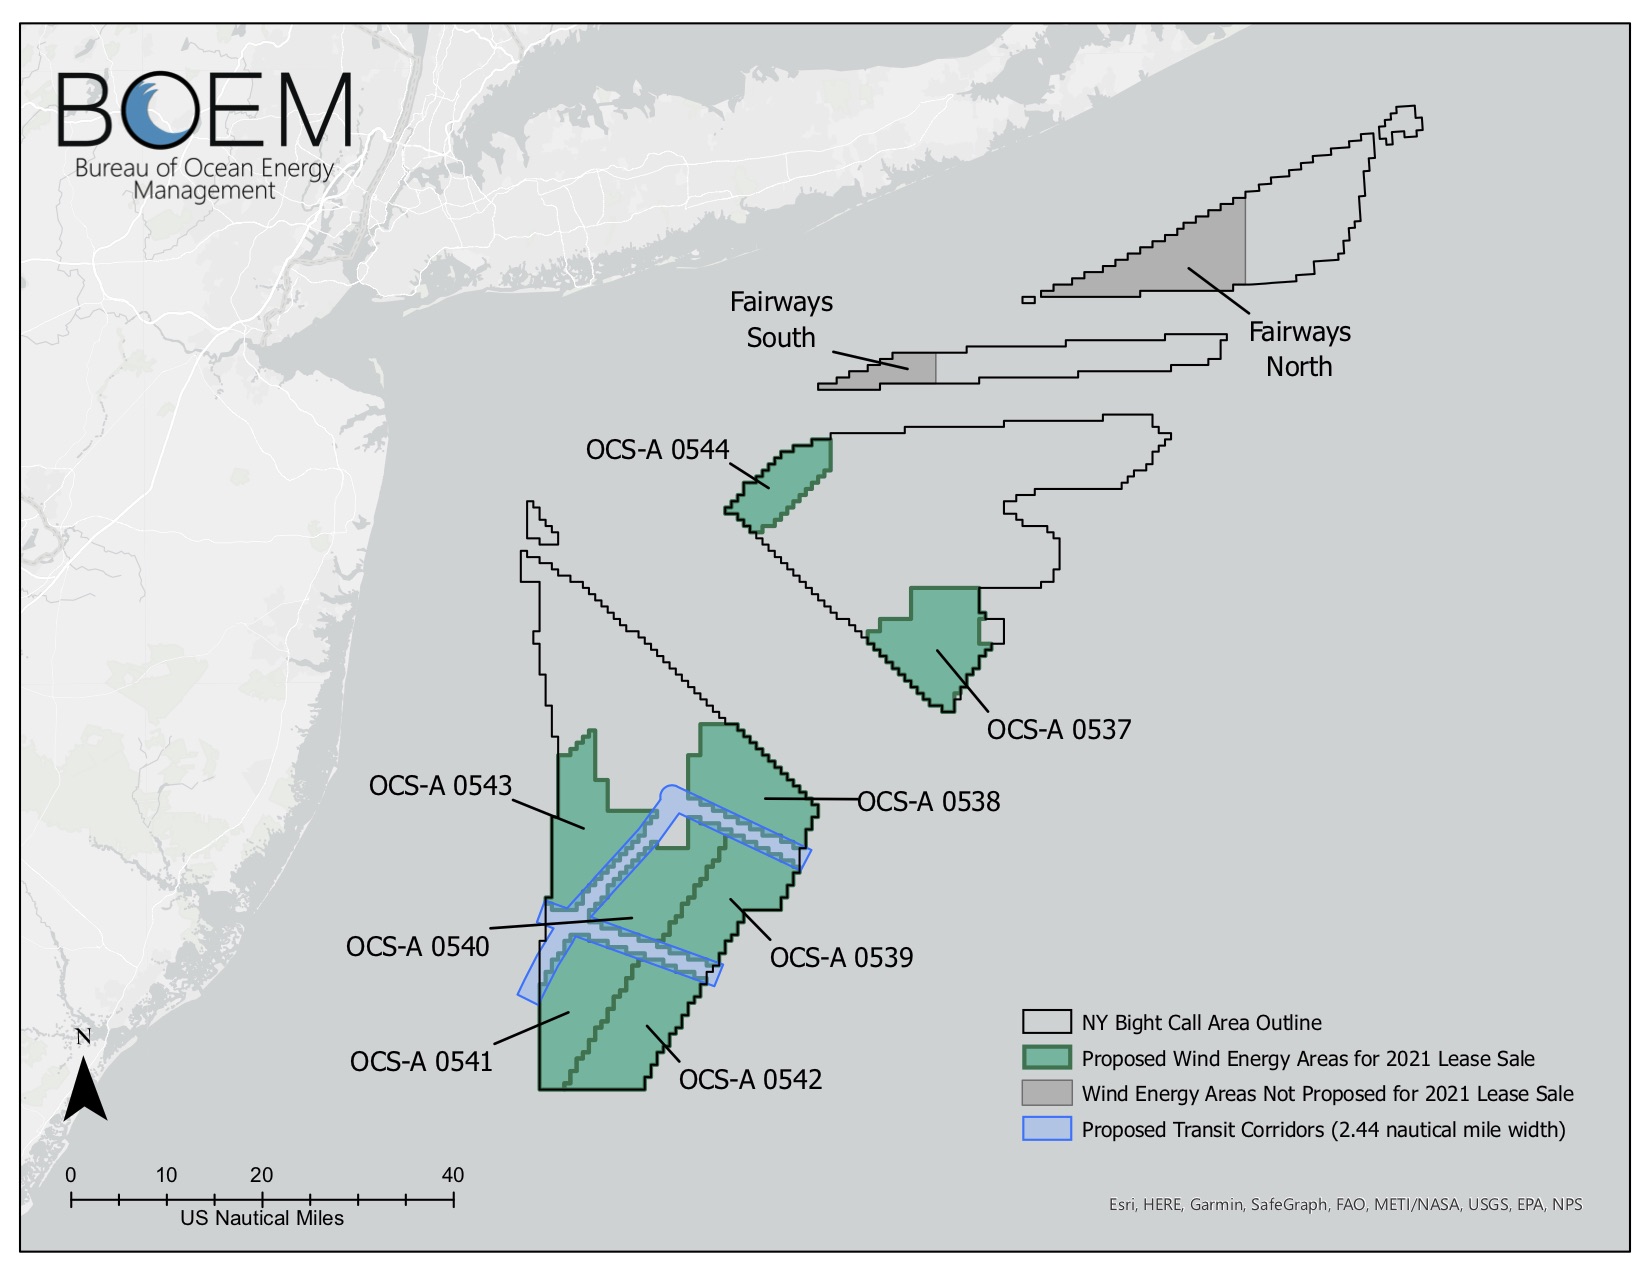 A map that shows the new offshore wind lease areas in the New York bight